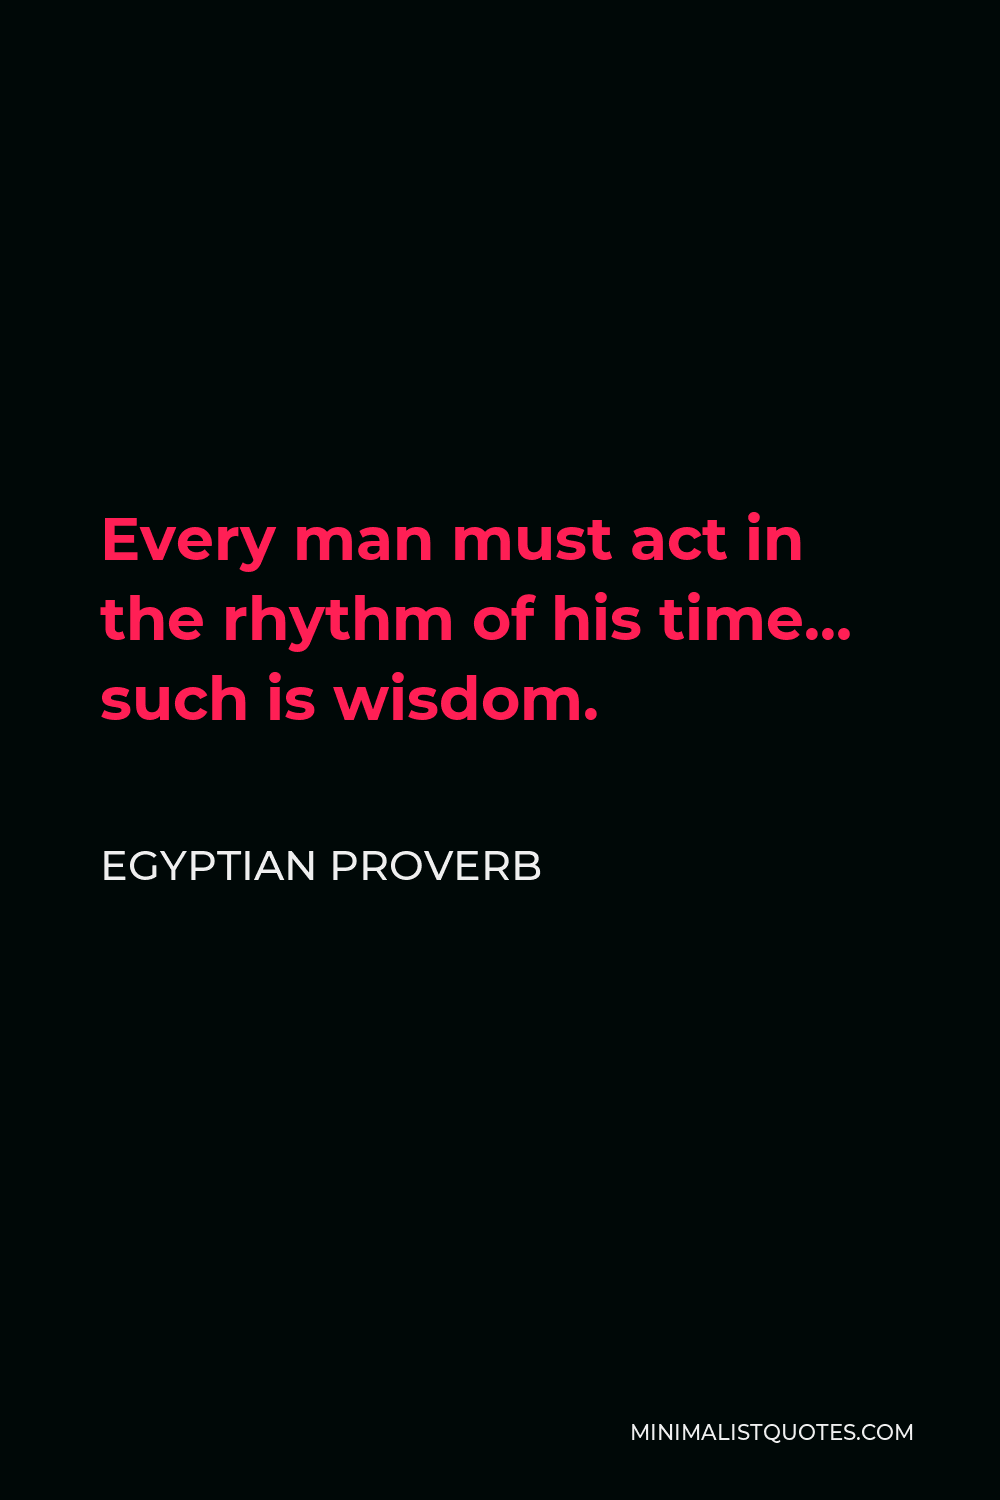 Egyptian Proverb Quote - Every man must act in the rhythm of his time… such is wisdom.